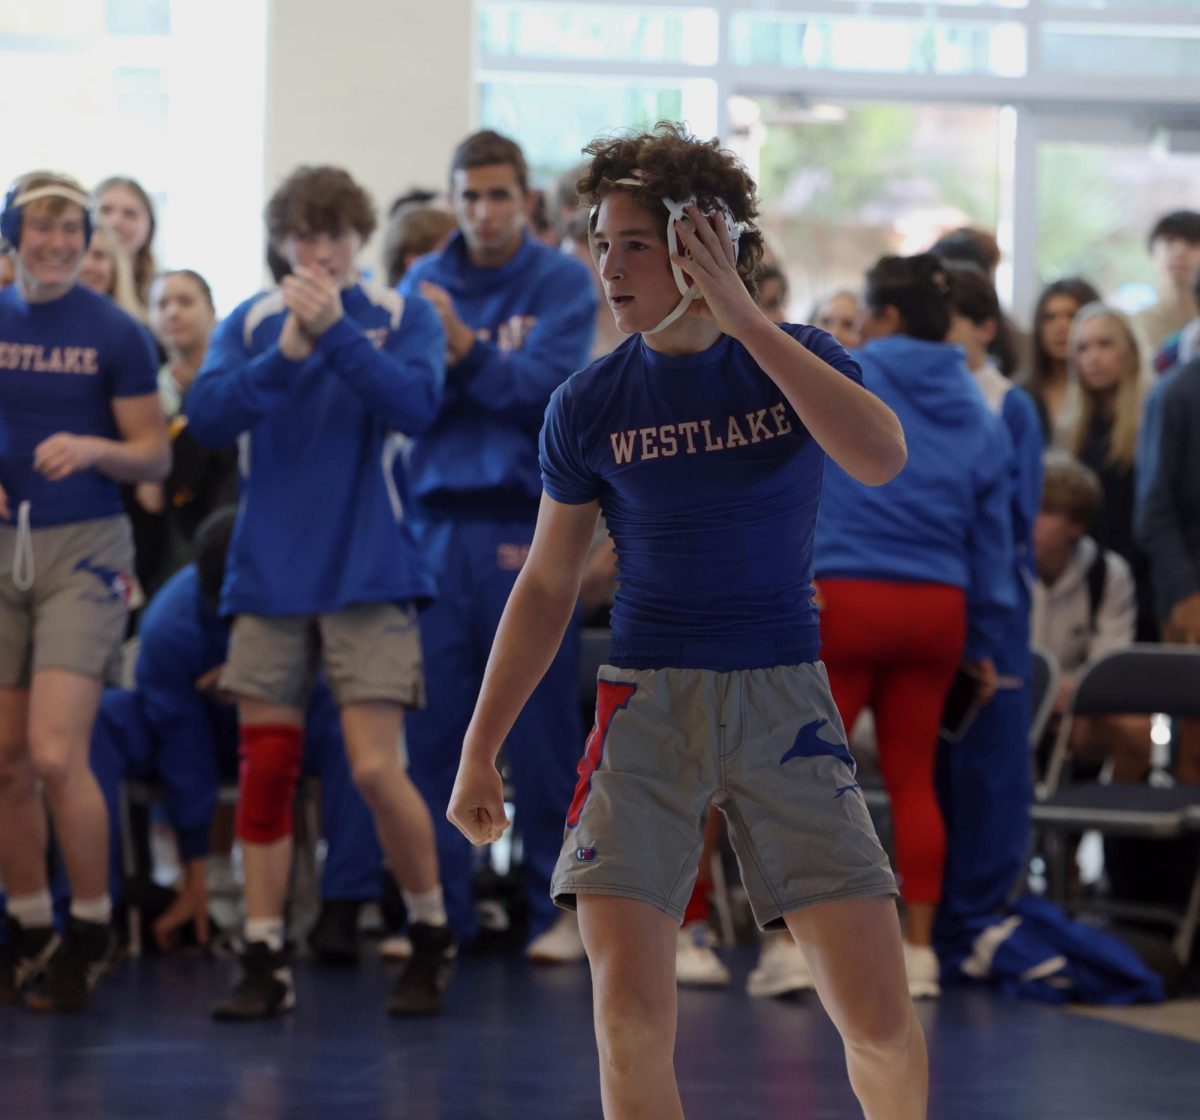 Freshman+Nico+Maurici+prepares+for+his+duel++at+the+15+annual+Lunch+Room+Brawl+Jan.+12.+His+teammates+and+fellow+students+cheered+him+on.